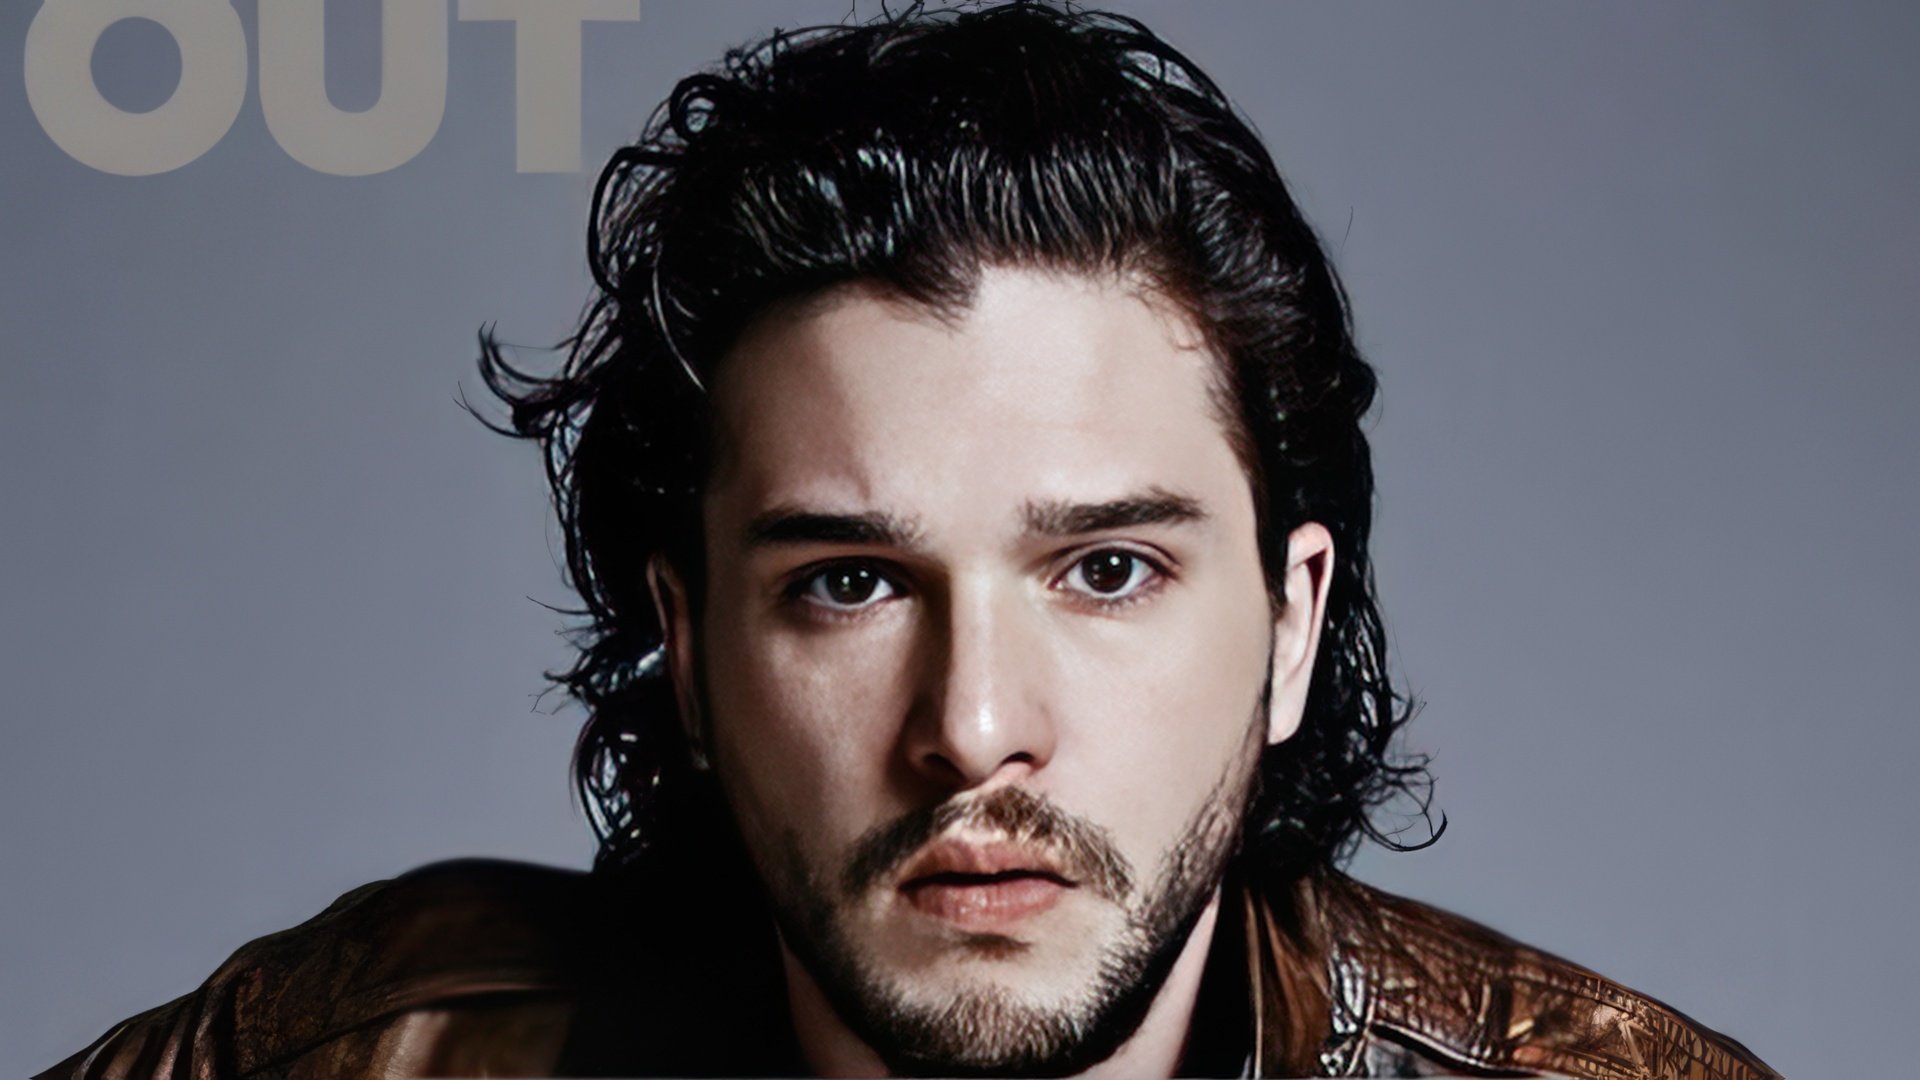 The actor's real name is Christopher Catesby Harington